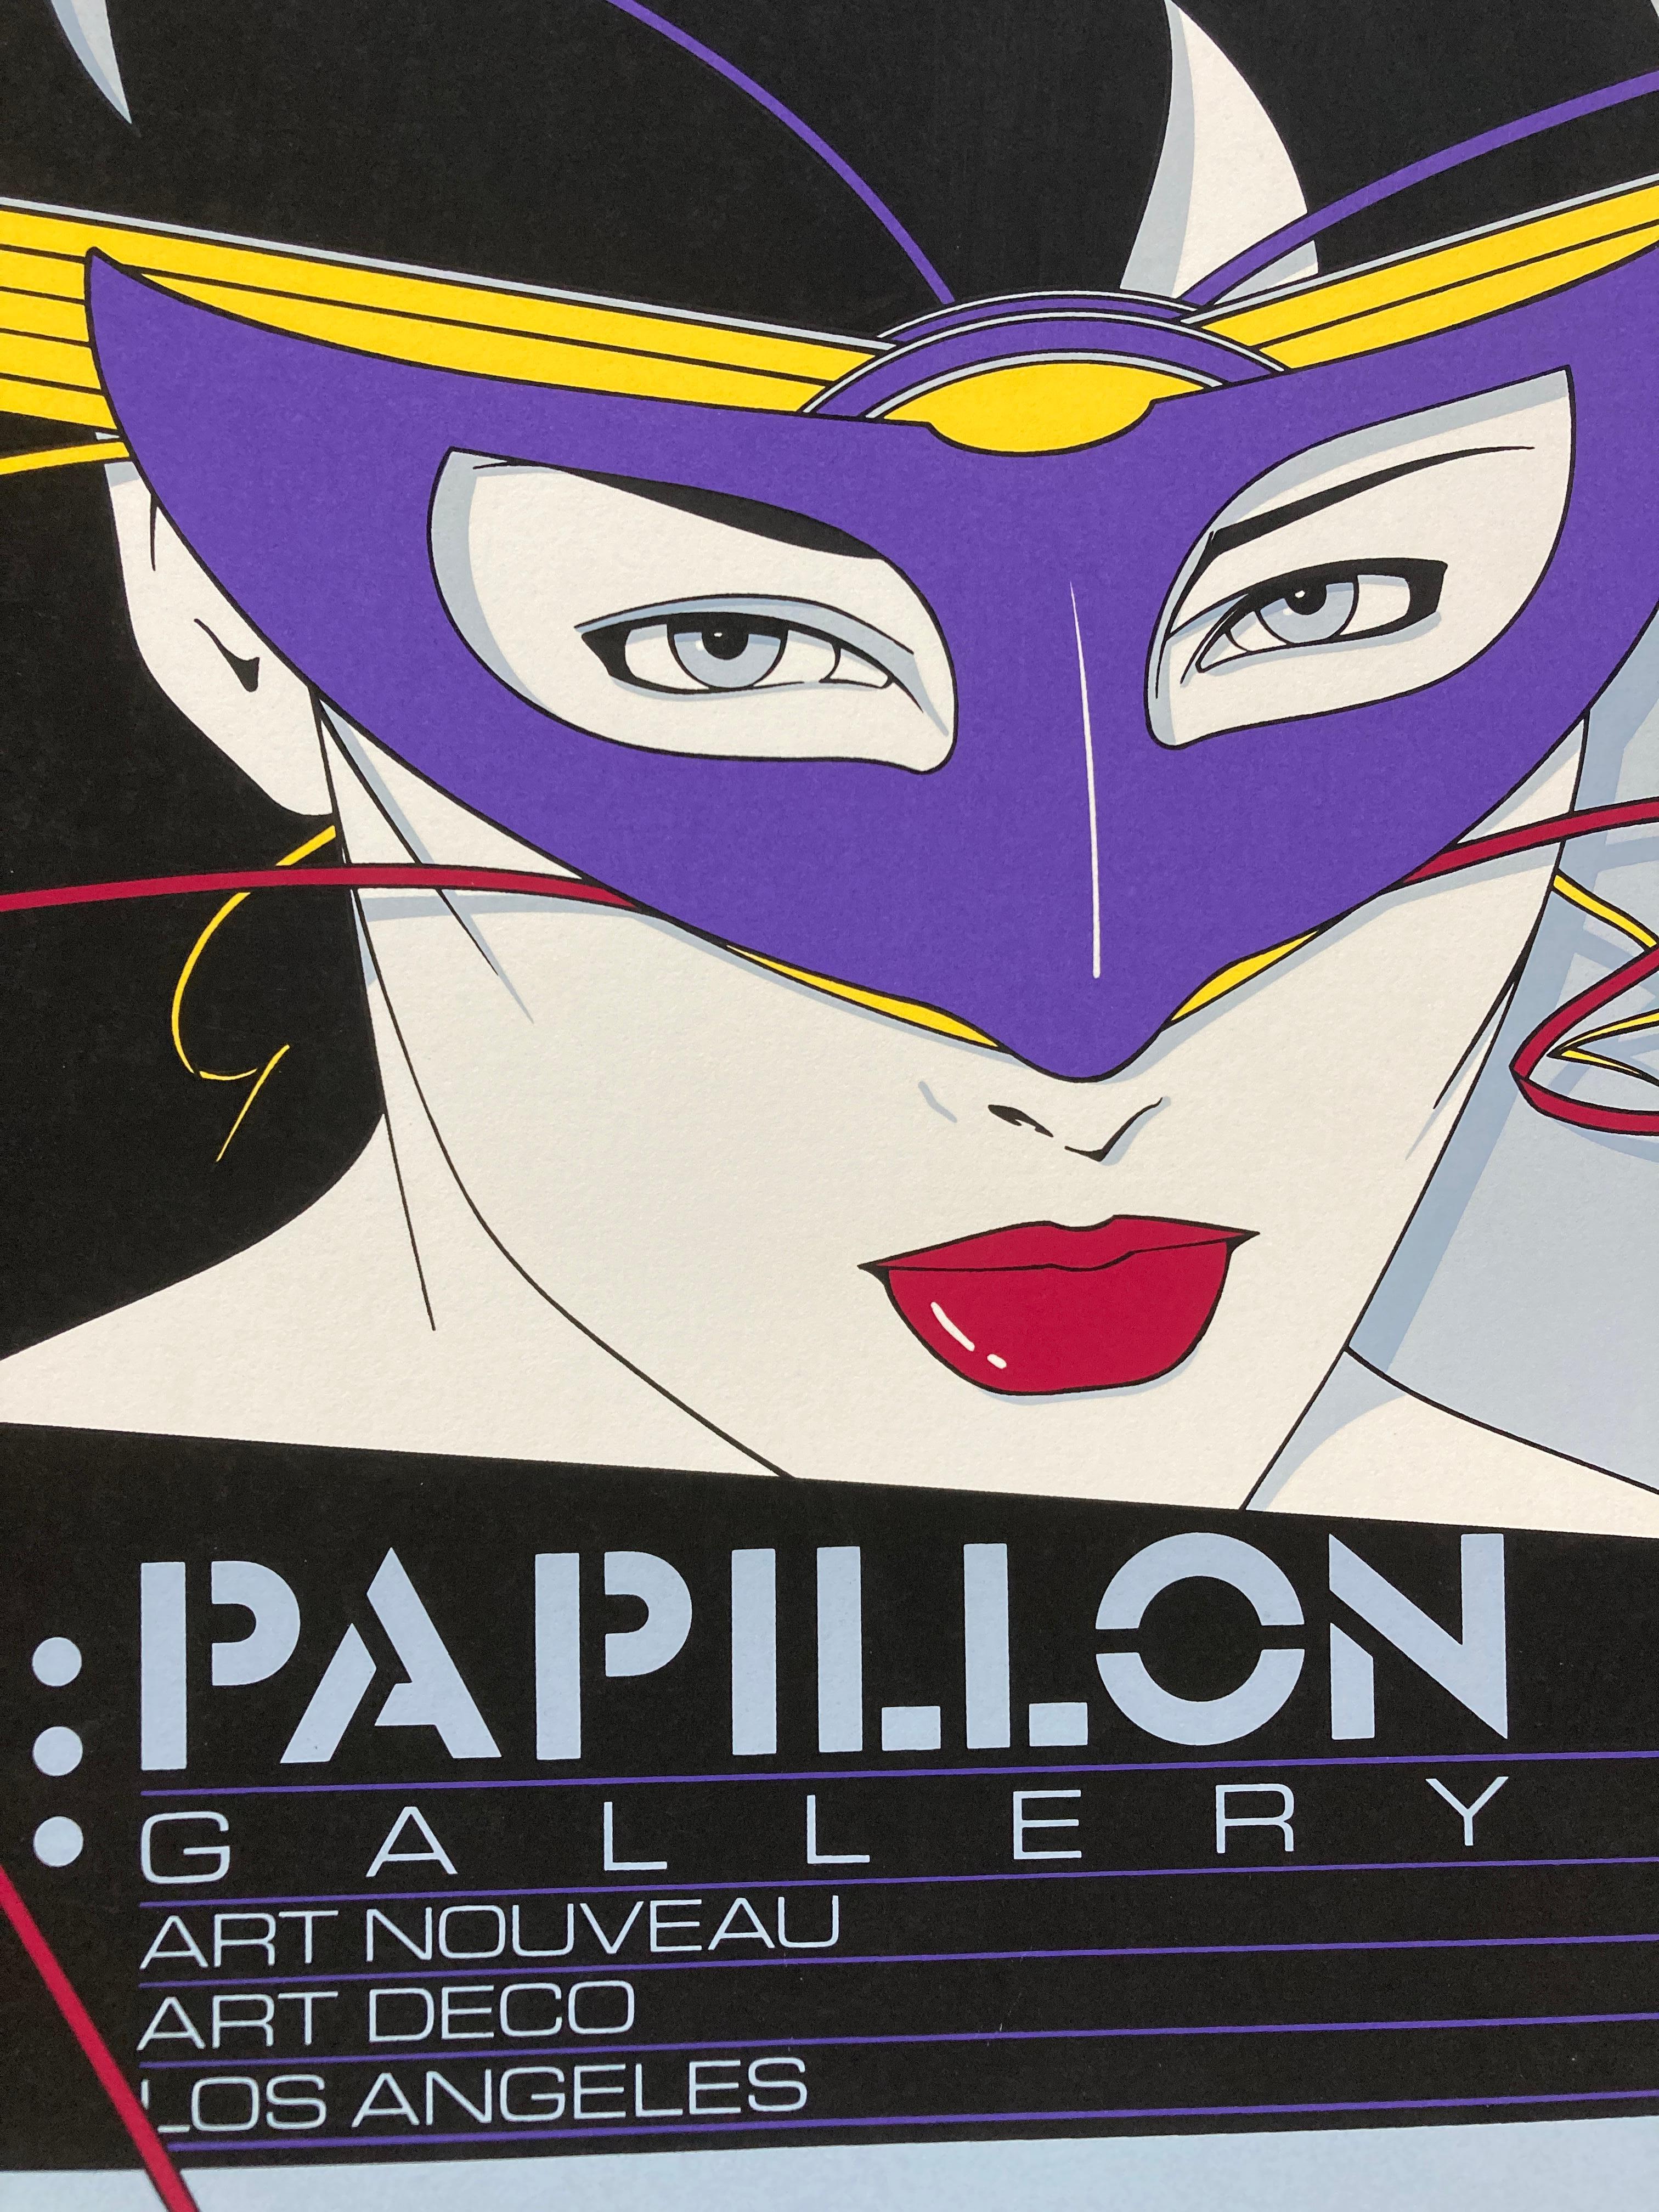 Patrick Nagel 'Papillon Gallery' Serigraph, 1981 For Sale 1